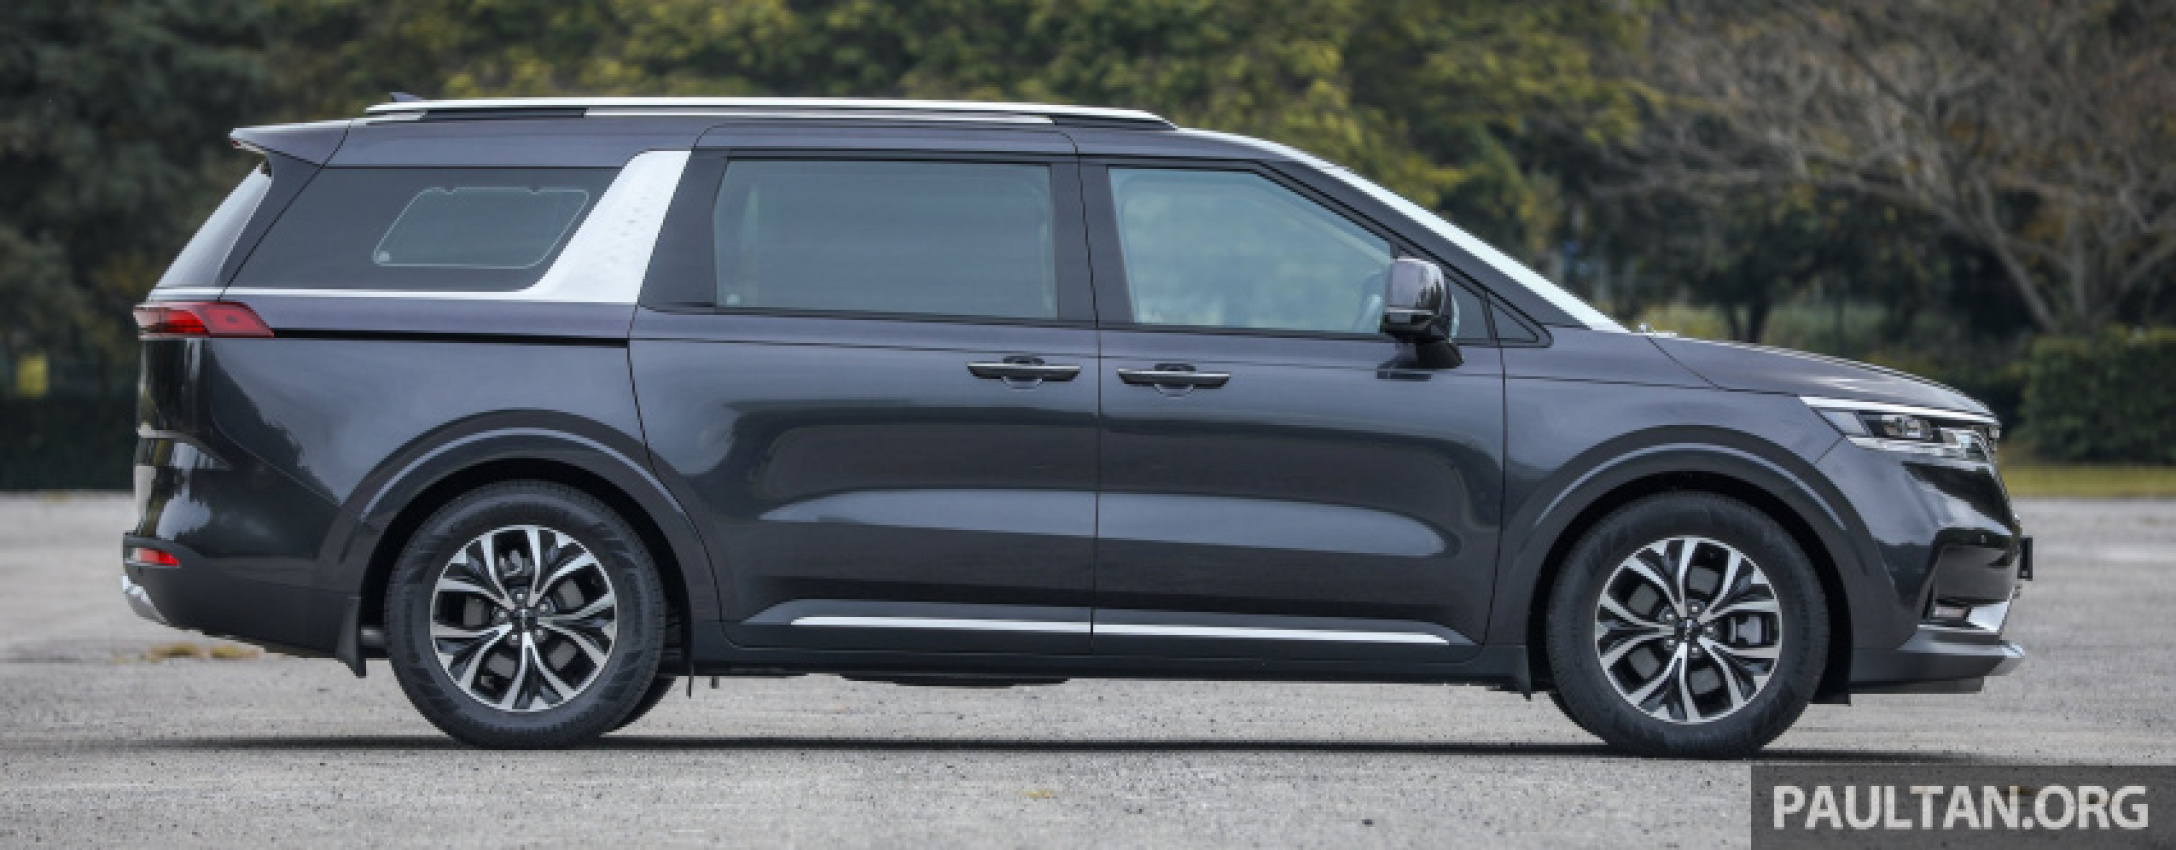 android, autos, car reviews, cars, kia, reviews, car reviews, android, review: 2022 kia carnival – looks fab and drives great, but perhaps not the luxury mpv for everyone